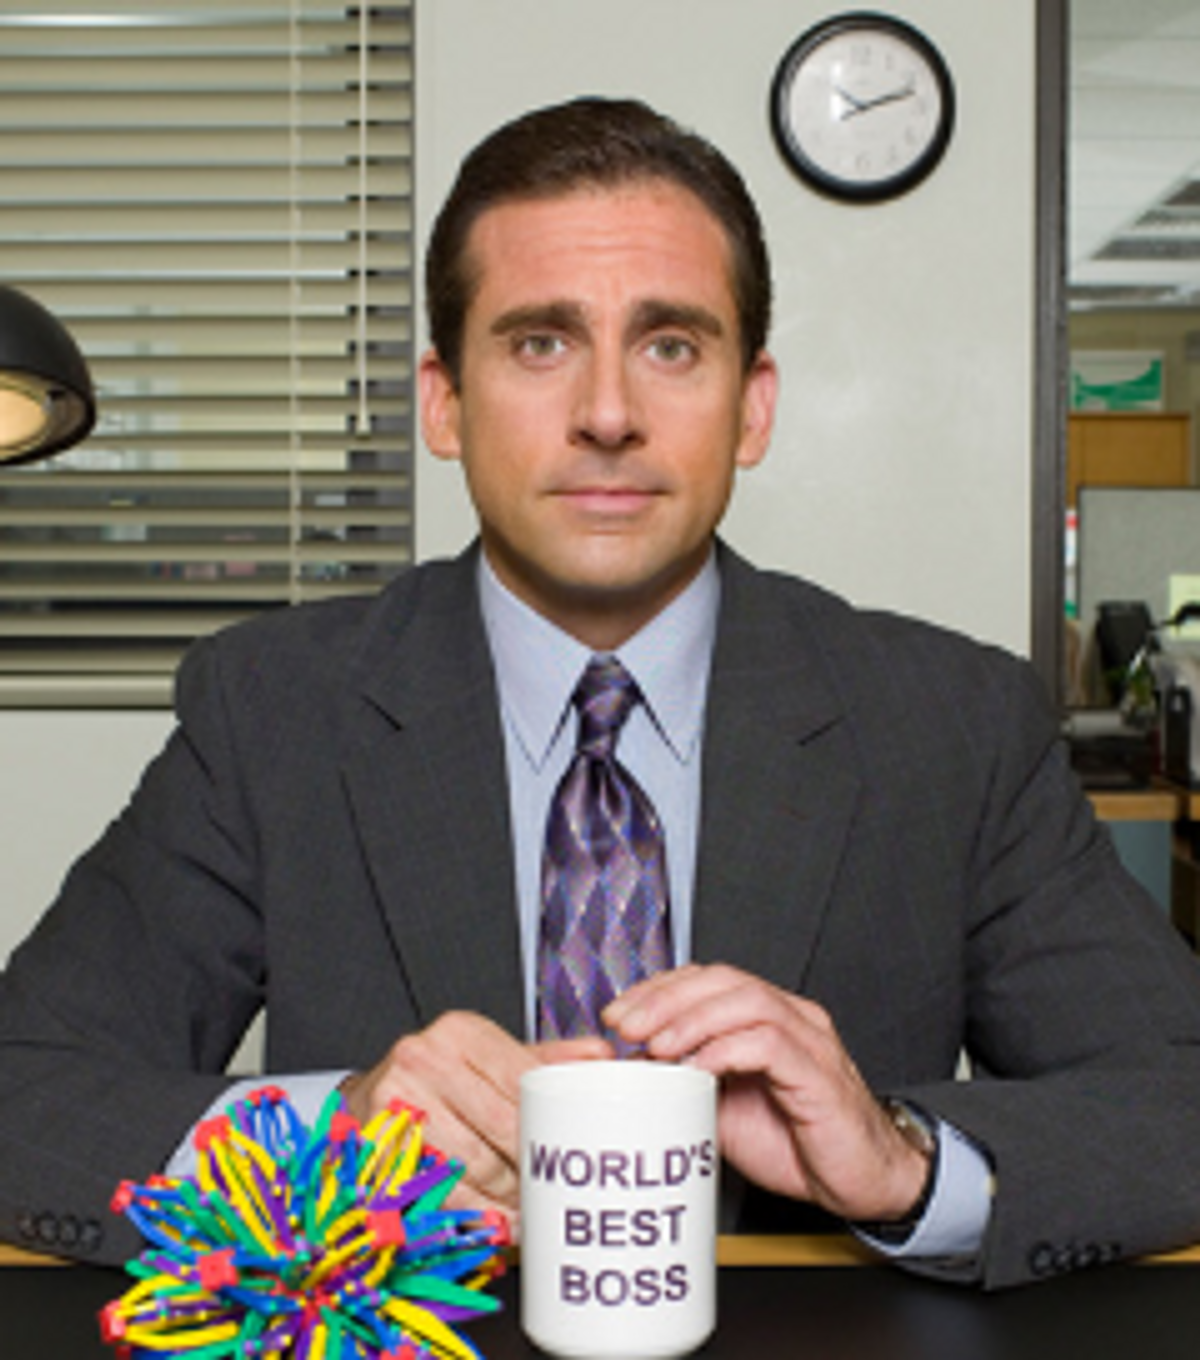 Getting Ready For Juice Jam, As Told By 'The Office'